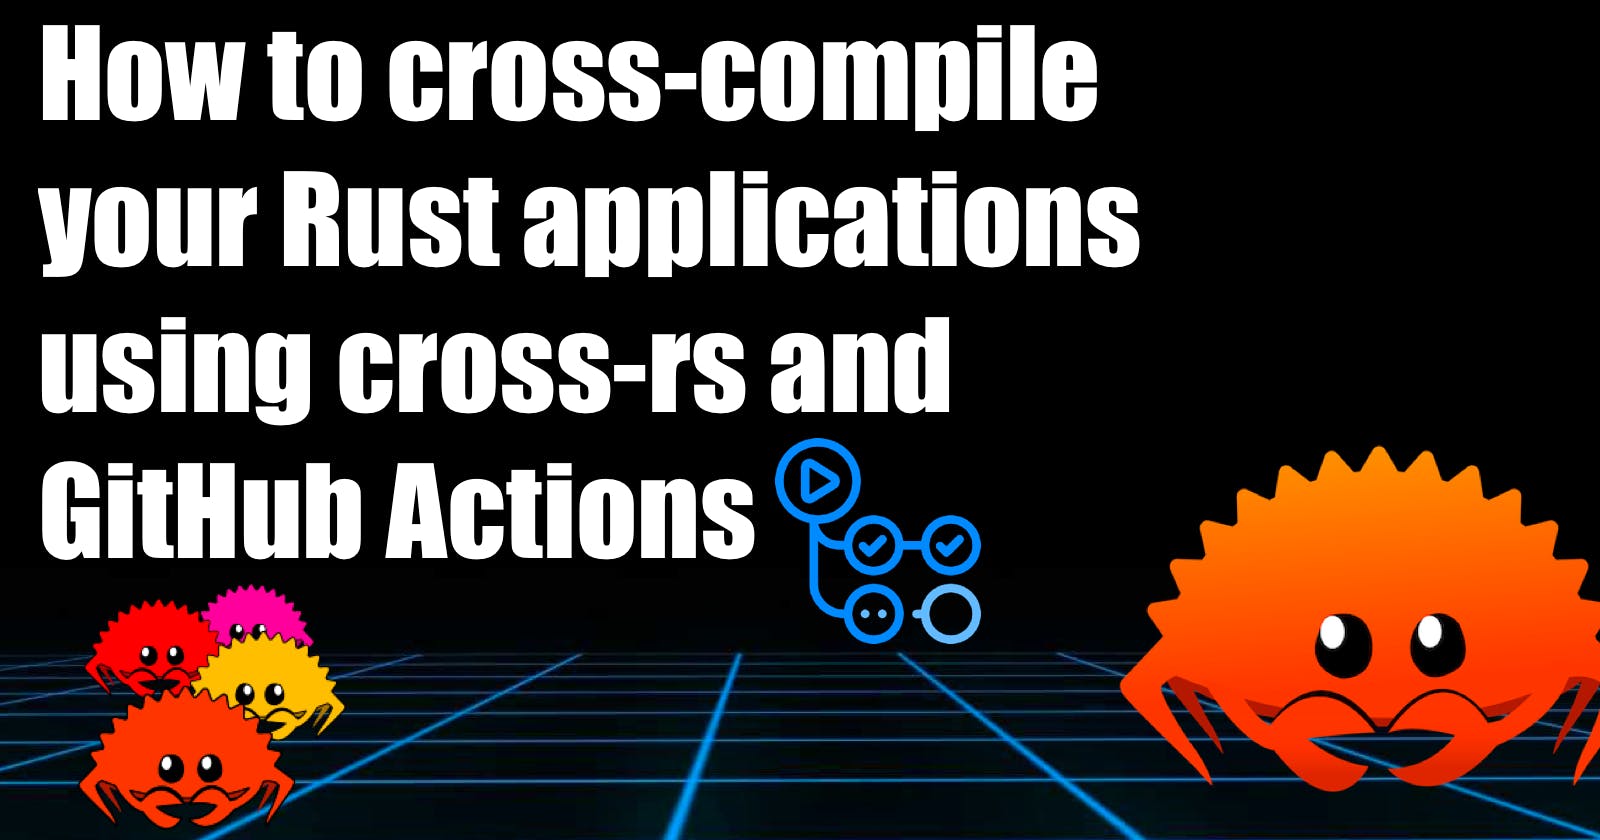 How to cross-compile your Rust applications using cross-rs and GitHub Actions